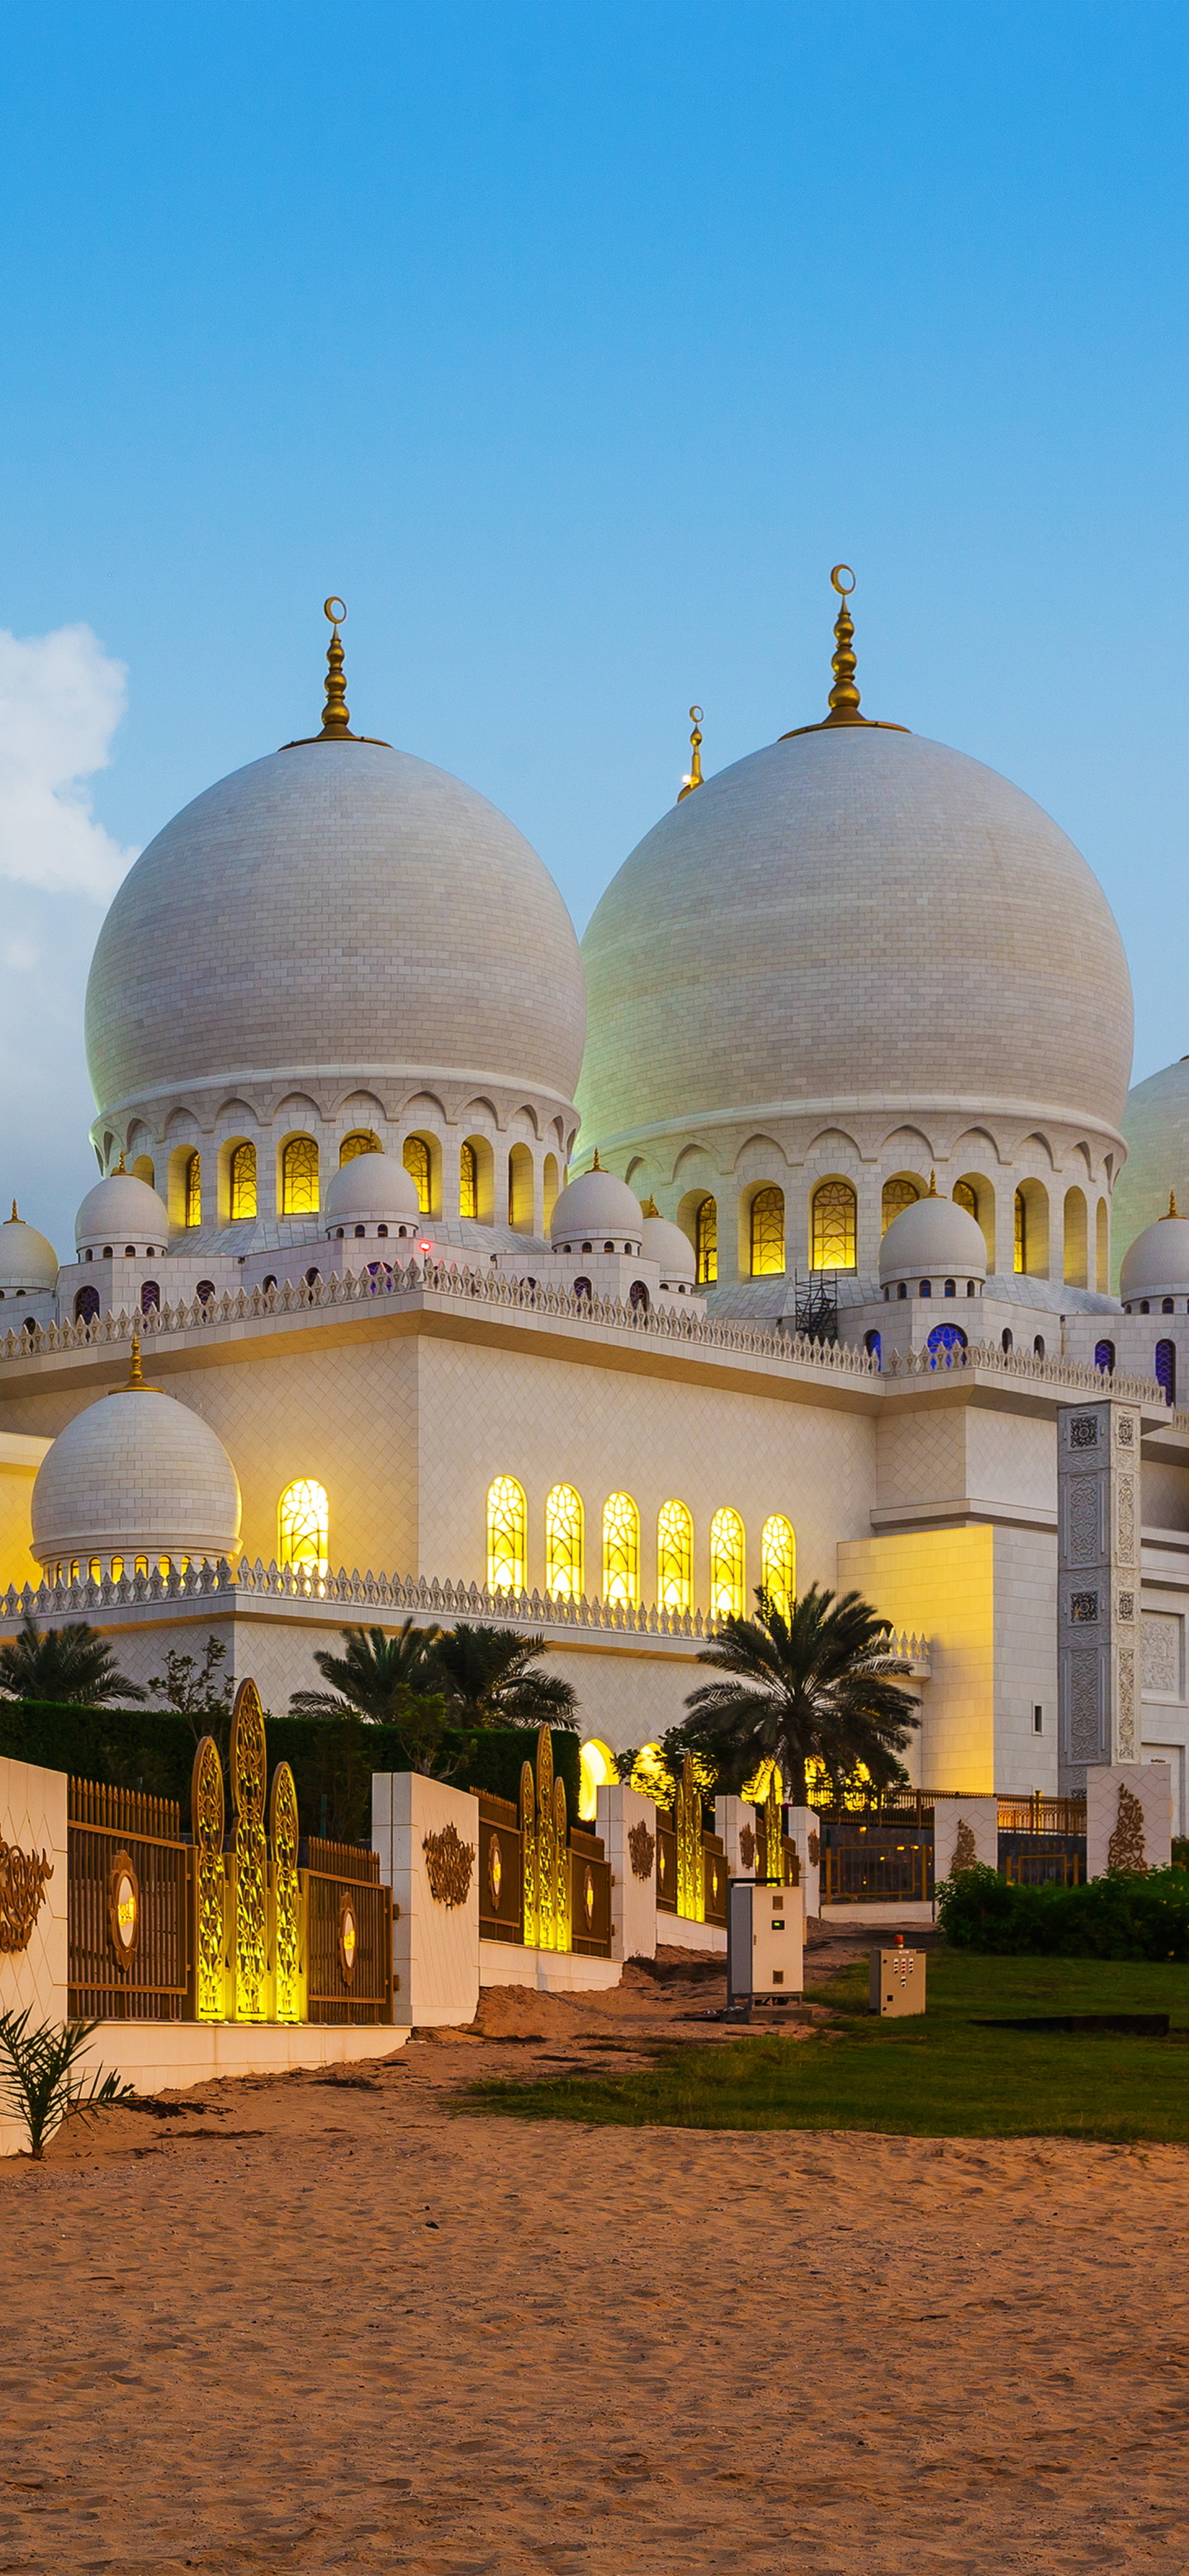 The Sheikh Zayed Grand Mosque is located in Abu Dhabi, the capital city of the United Arab Emirates.